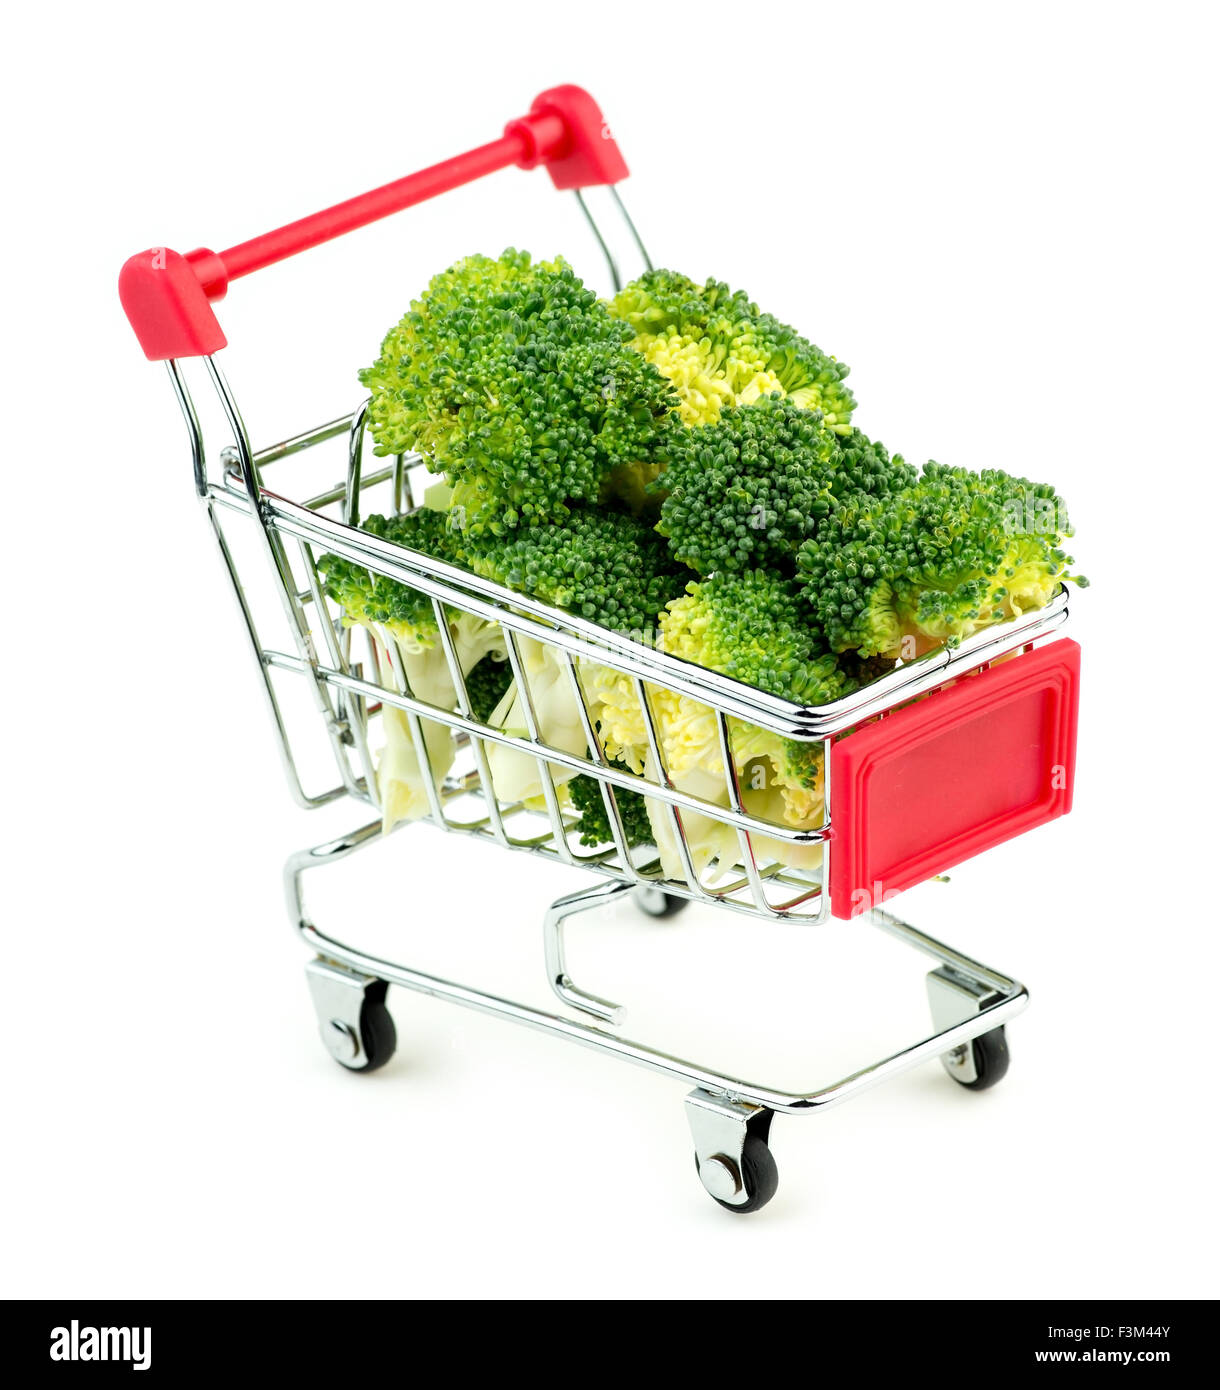 Giant broccoli bunches in market shopping store cart isolated on white background Stock Photo